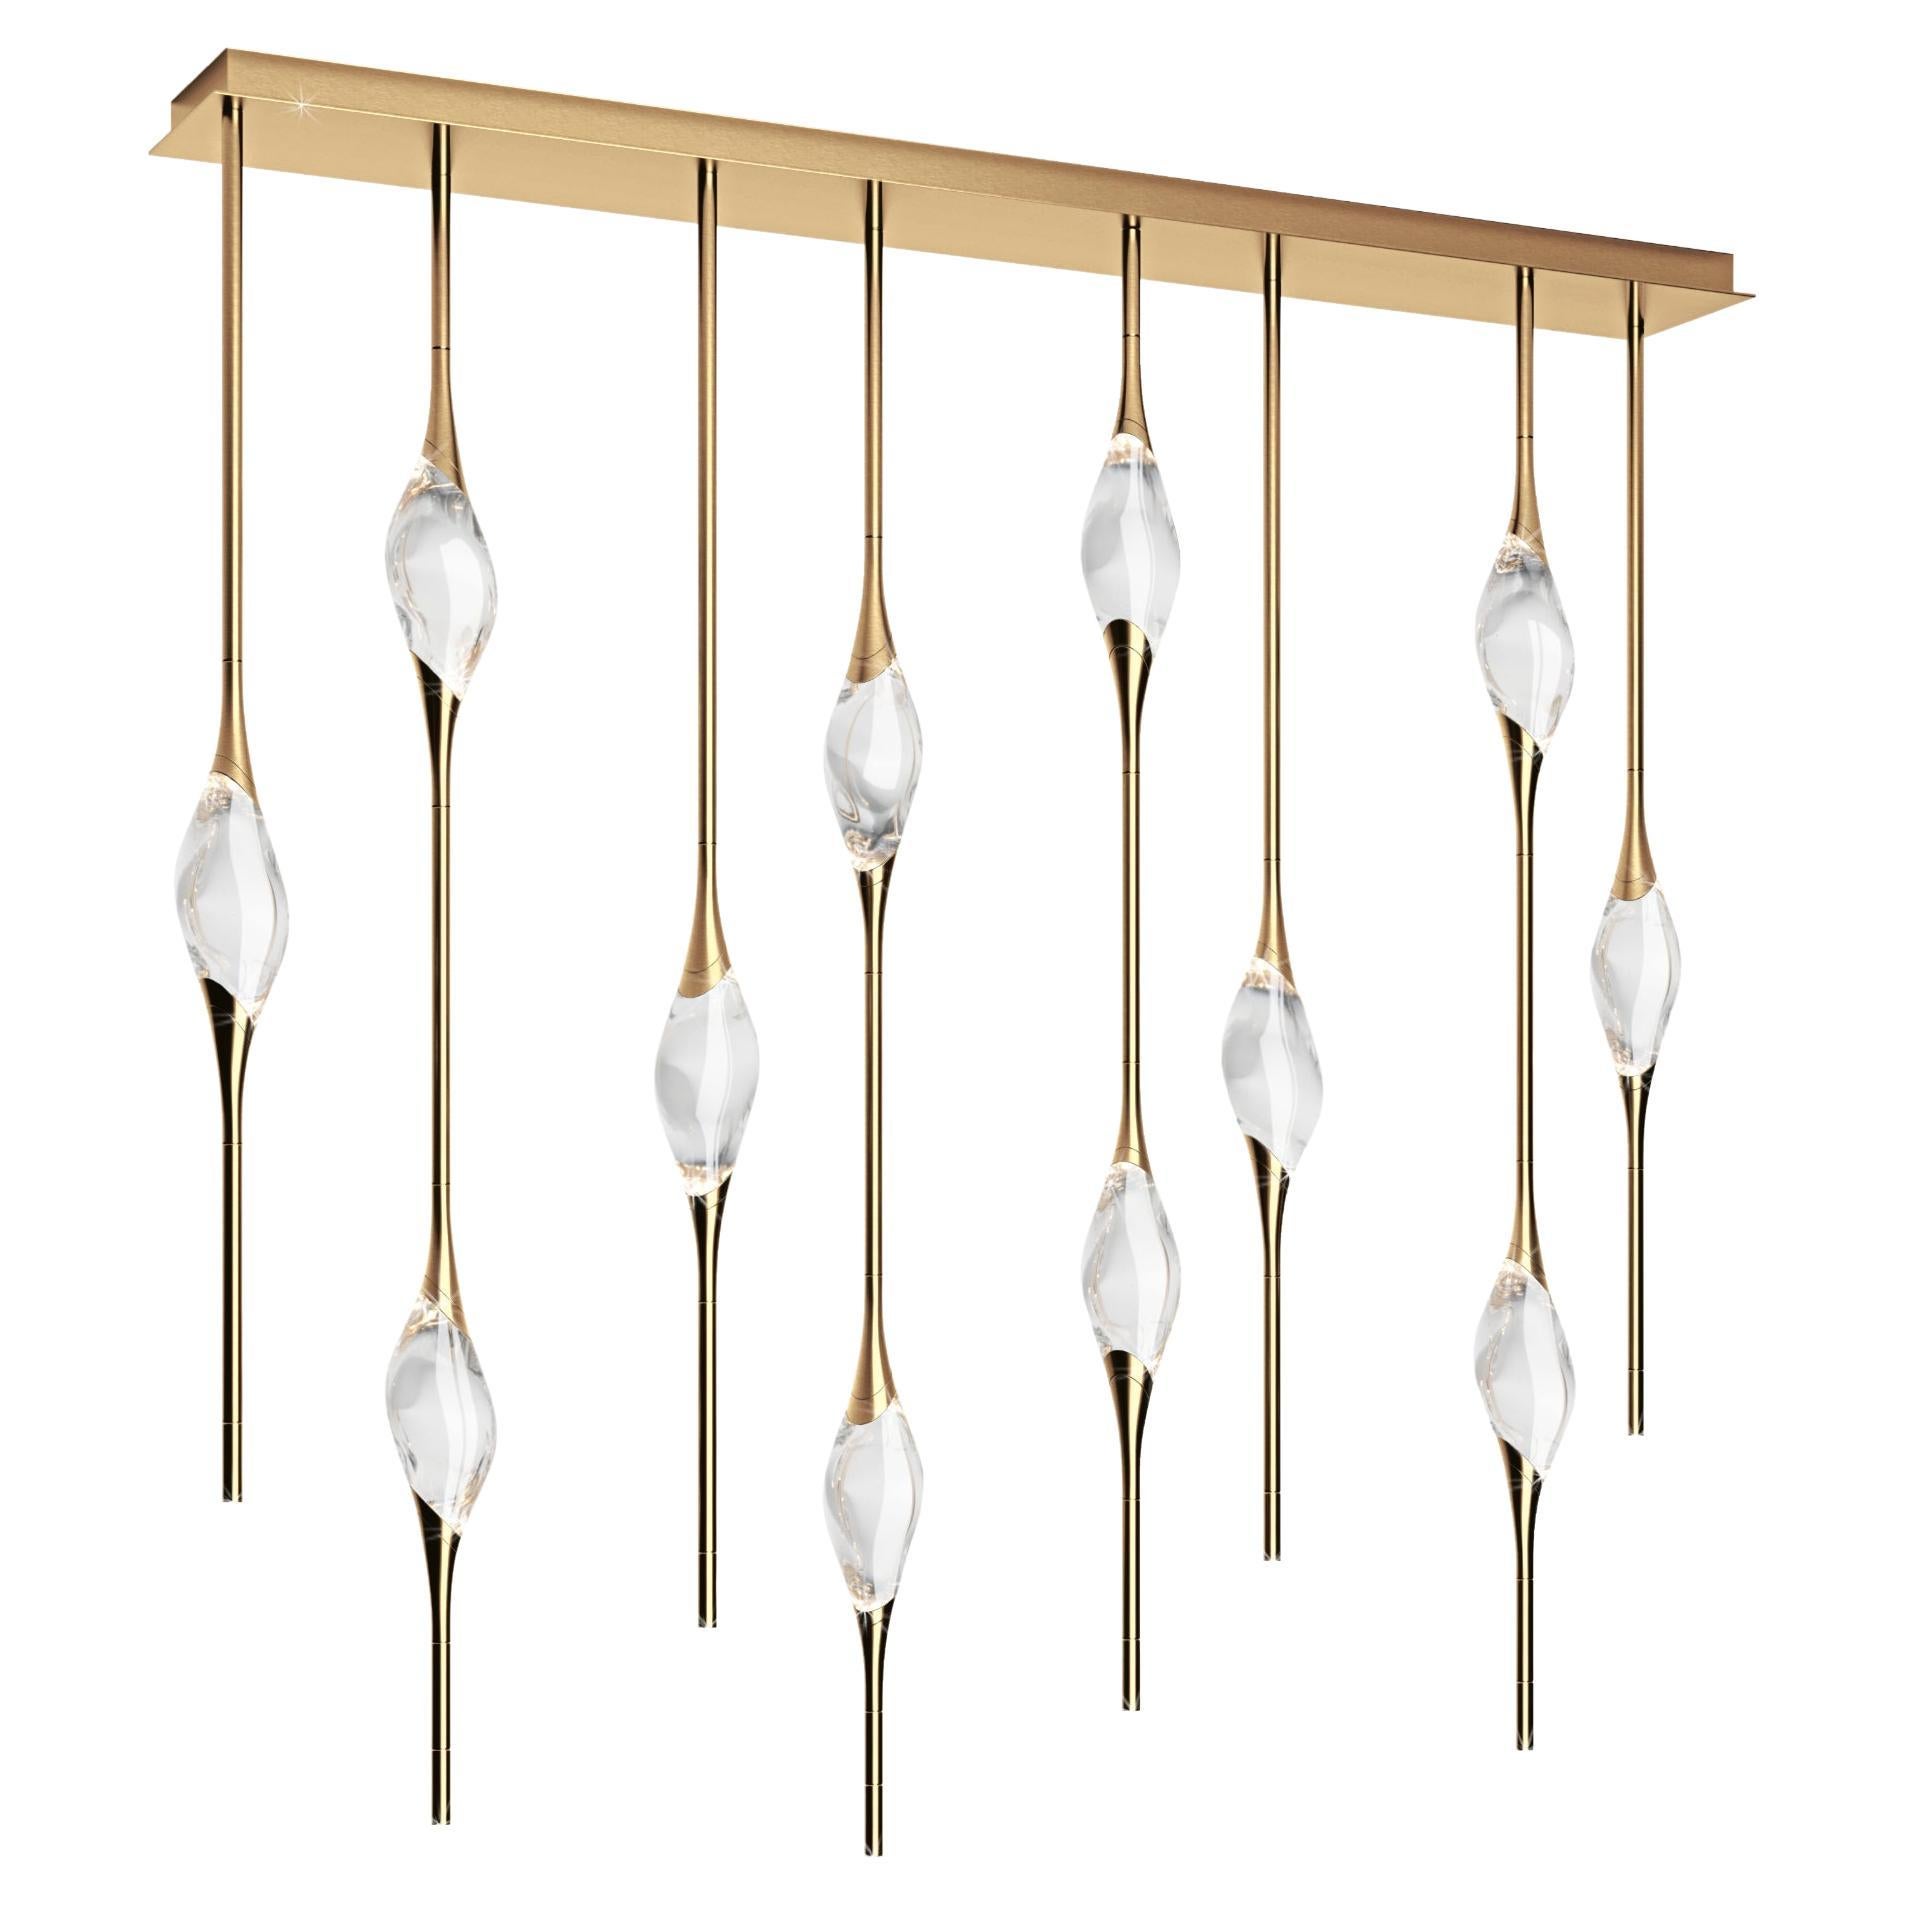 "Il Pezzo 12 Staggered Chandelier" - length 150cm/59” - polished brass - crystal For Sale